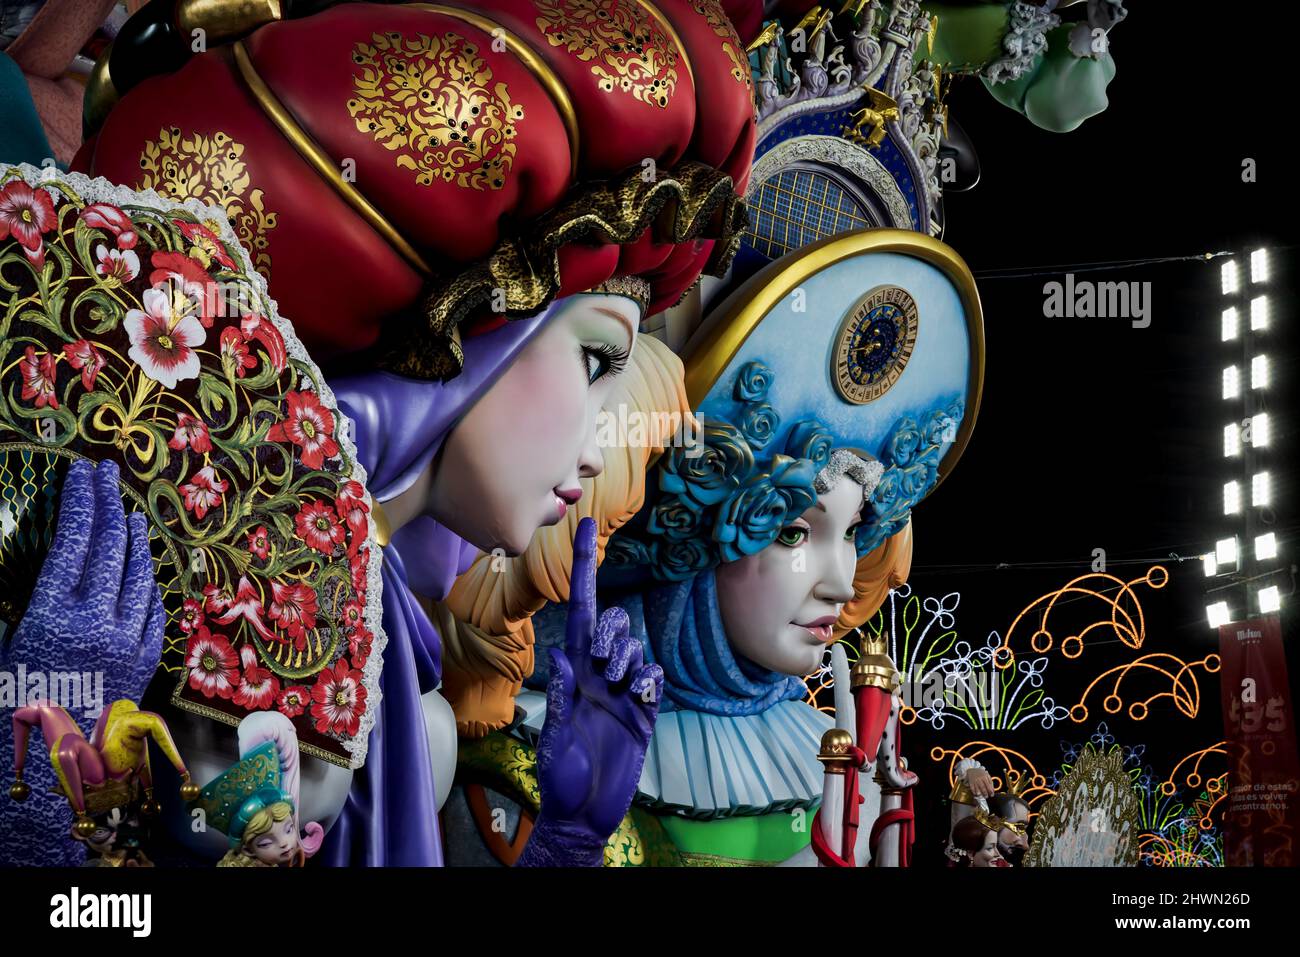 Valencia, Spain - 4 September 2021: Detail of Fallas figurines, years winning work with the topic 'Venice fantasy' by the artist Pere Baenas at Conven Stock Photo